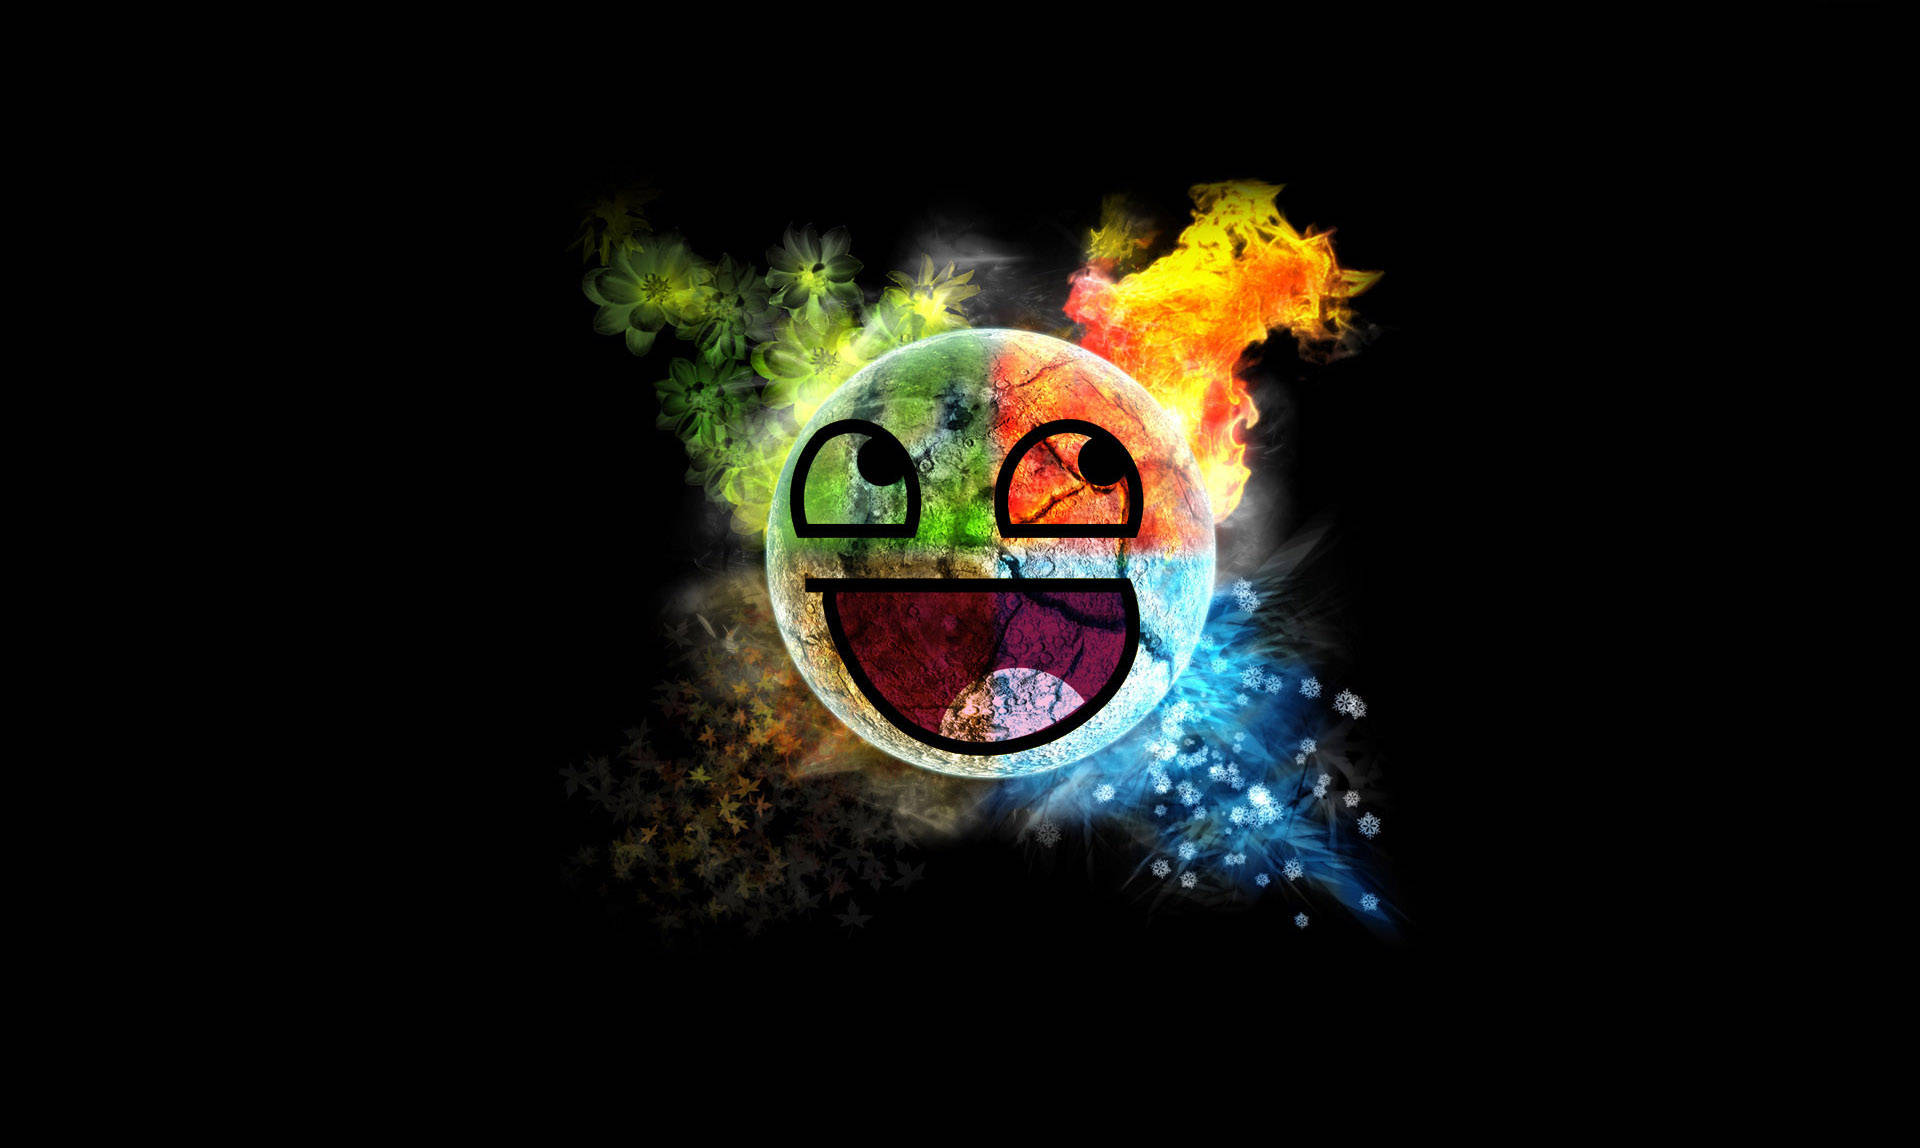 Epic Smiley for an EPIC day! Wallpaper